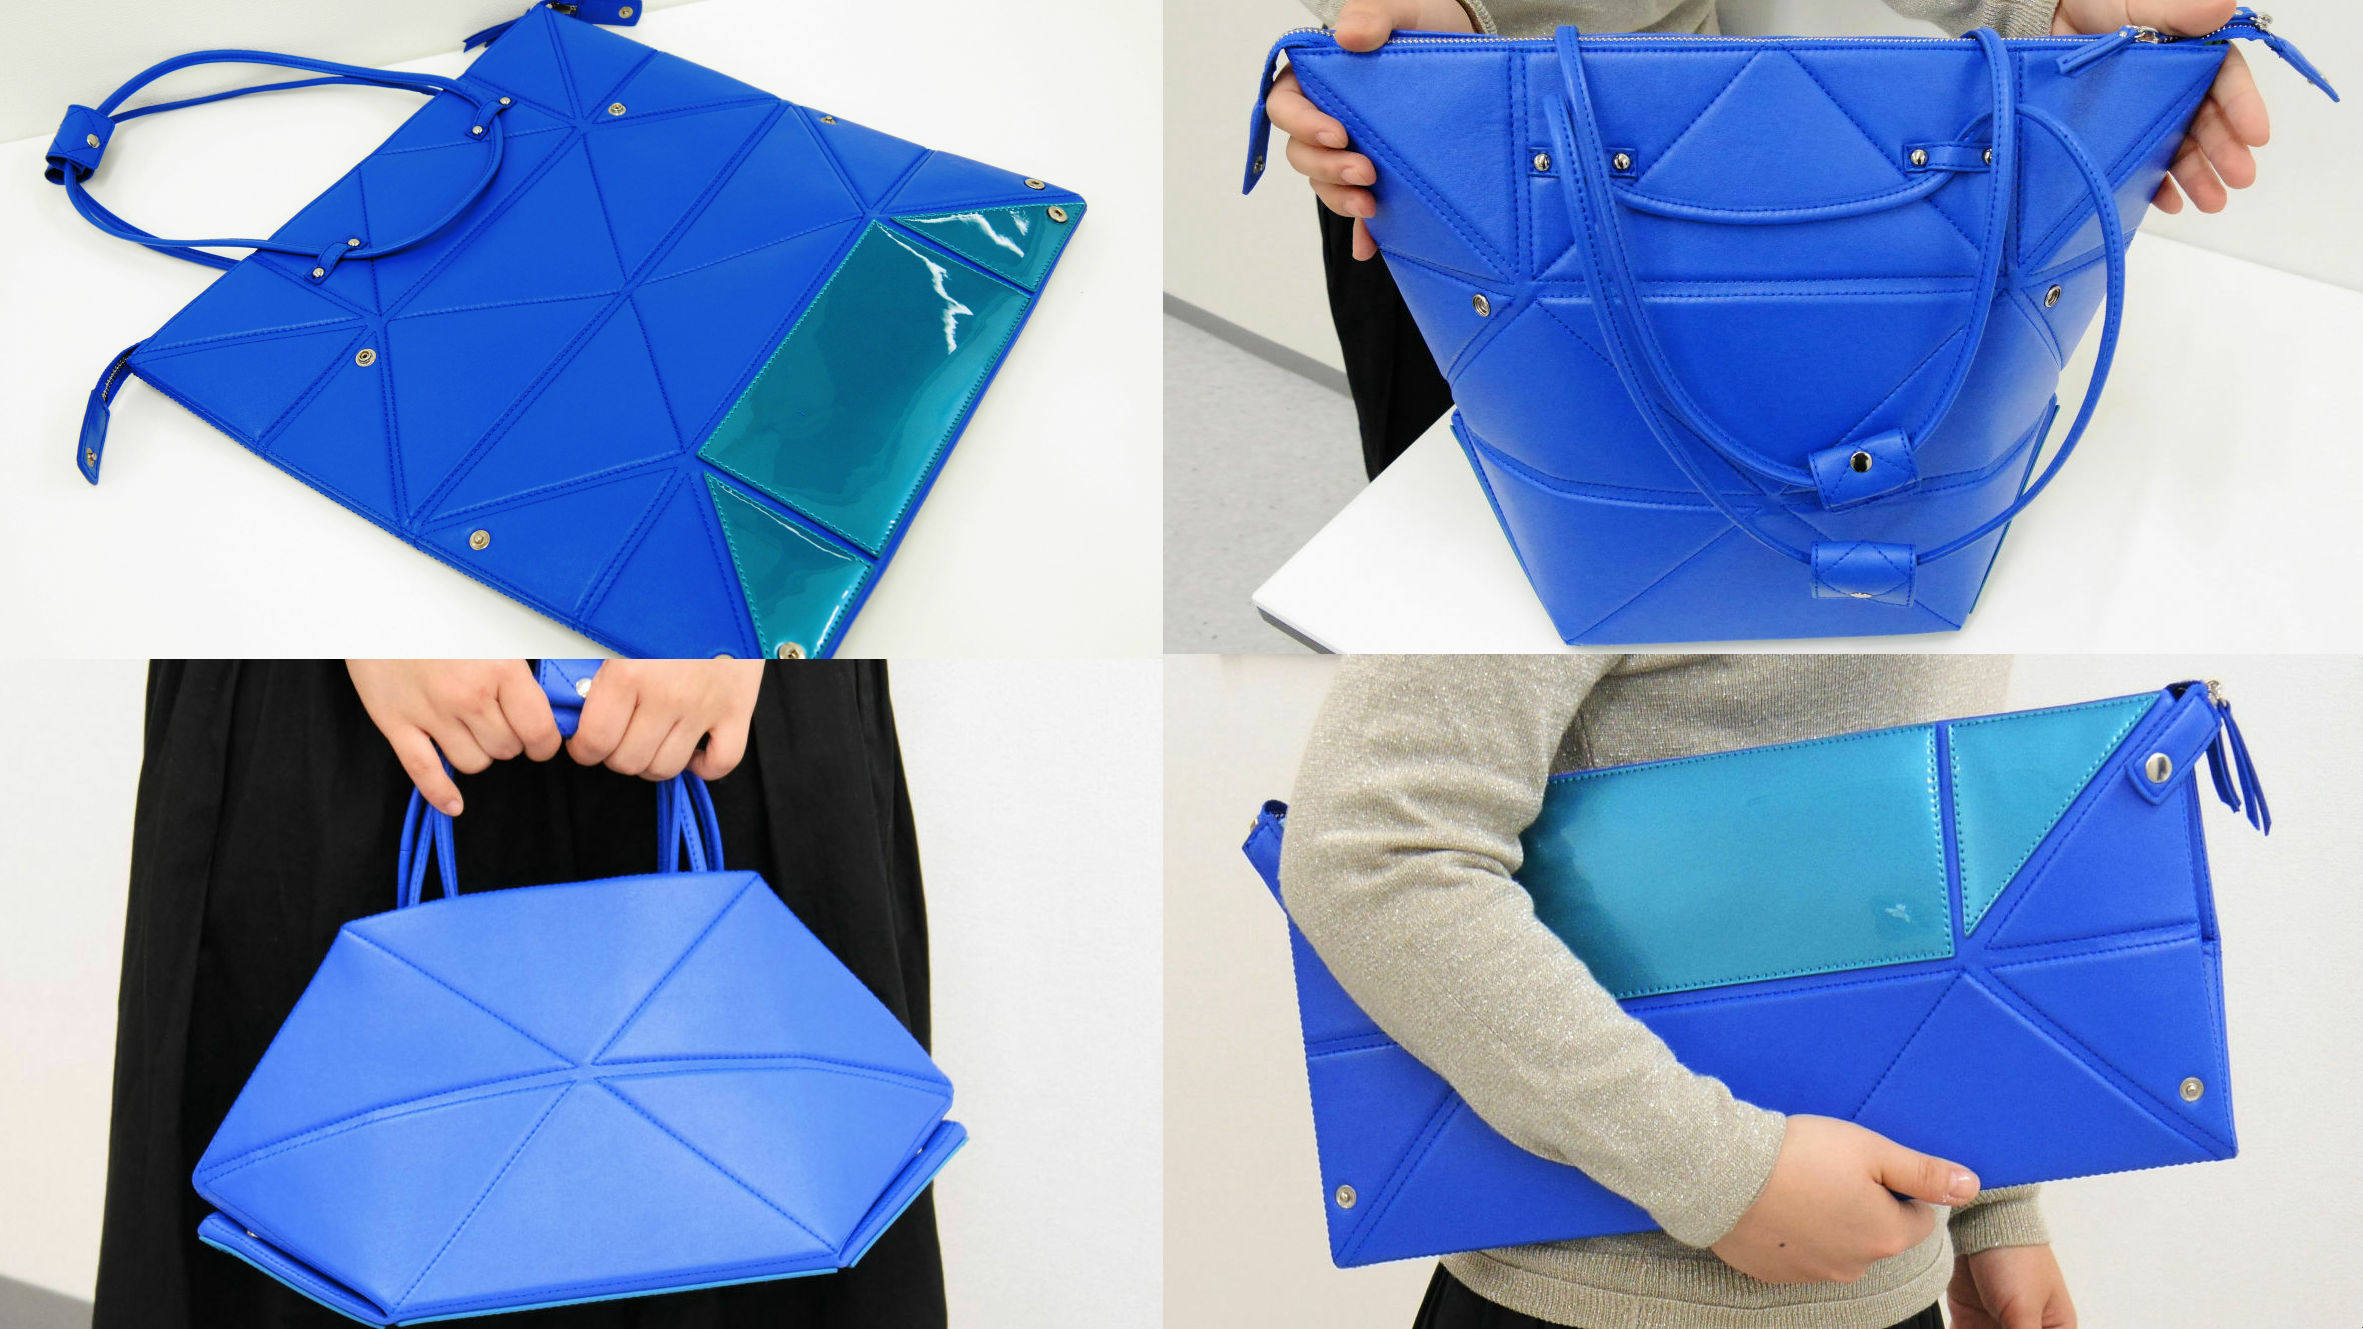 Step 8: Examine the shape of your bag from the side